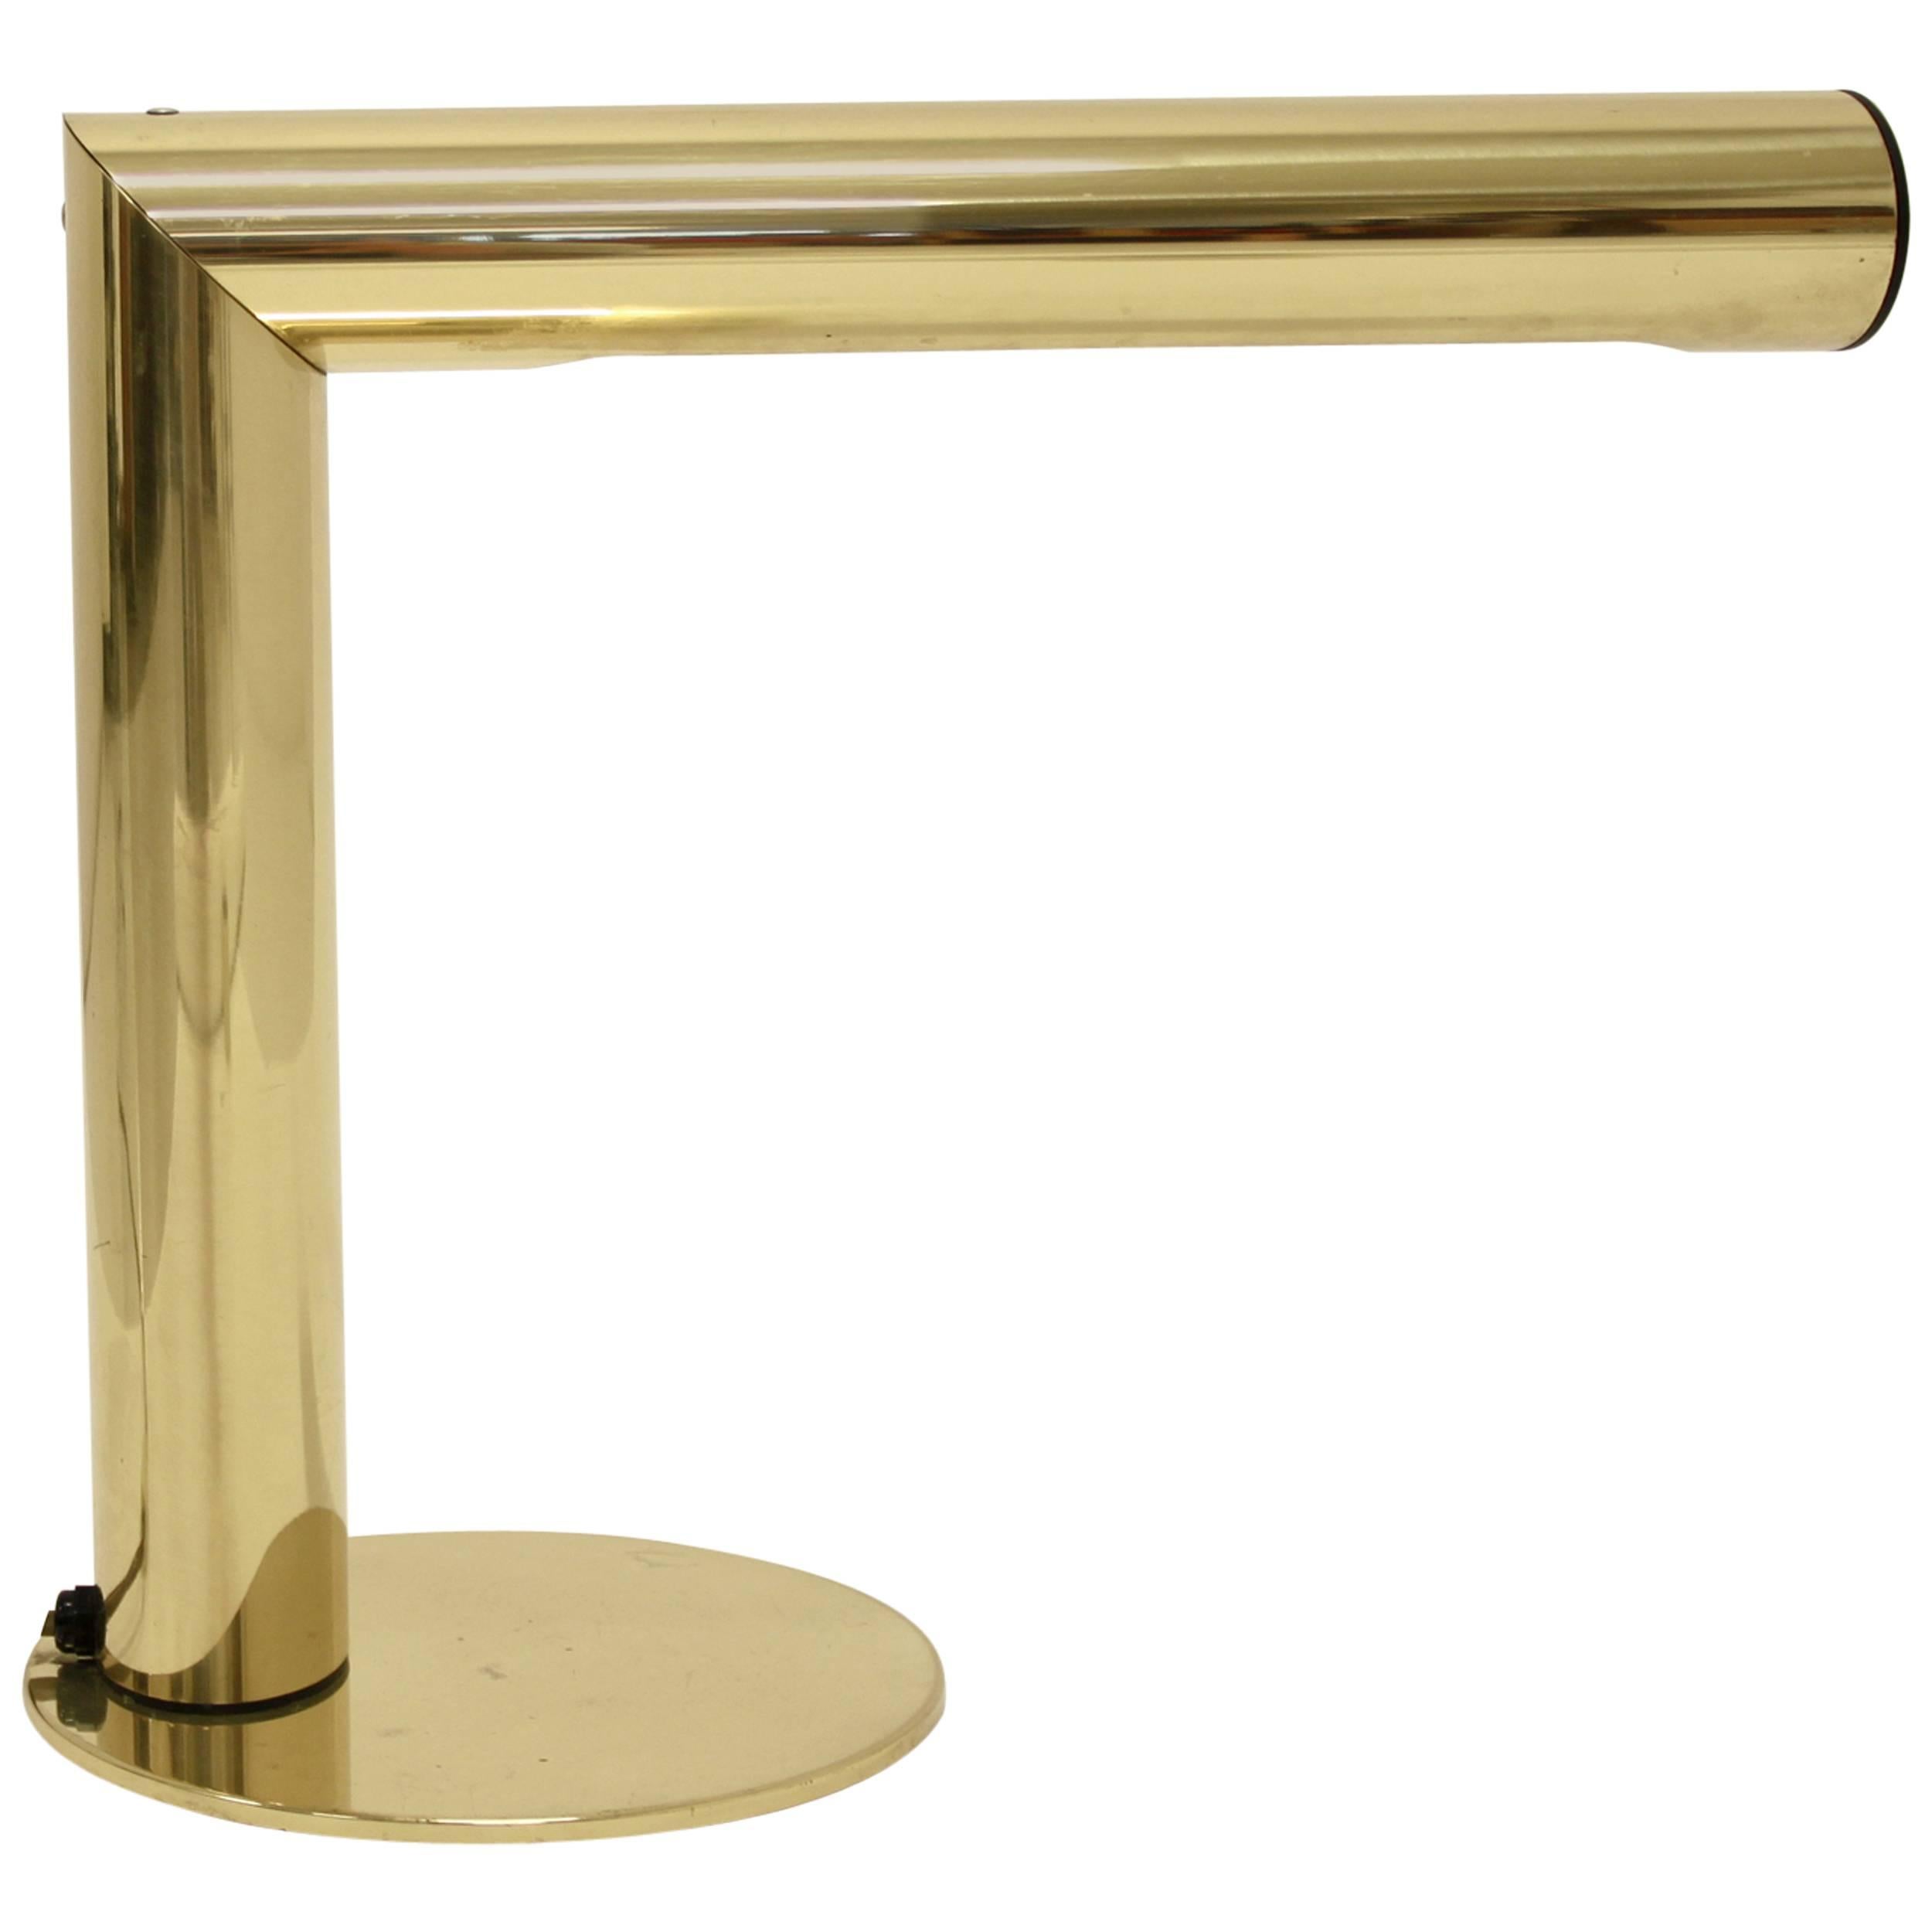 Wonderful and minimalist table lamp on a brass frame with revolving lampshade. Designed by Jonas Hidle and made by Høvik Lys AS, Norway, circa 1980 second half. The lamp is a remarkable example of Norwegian post modernist design produced in a short